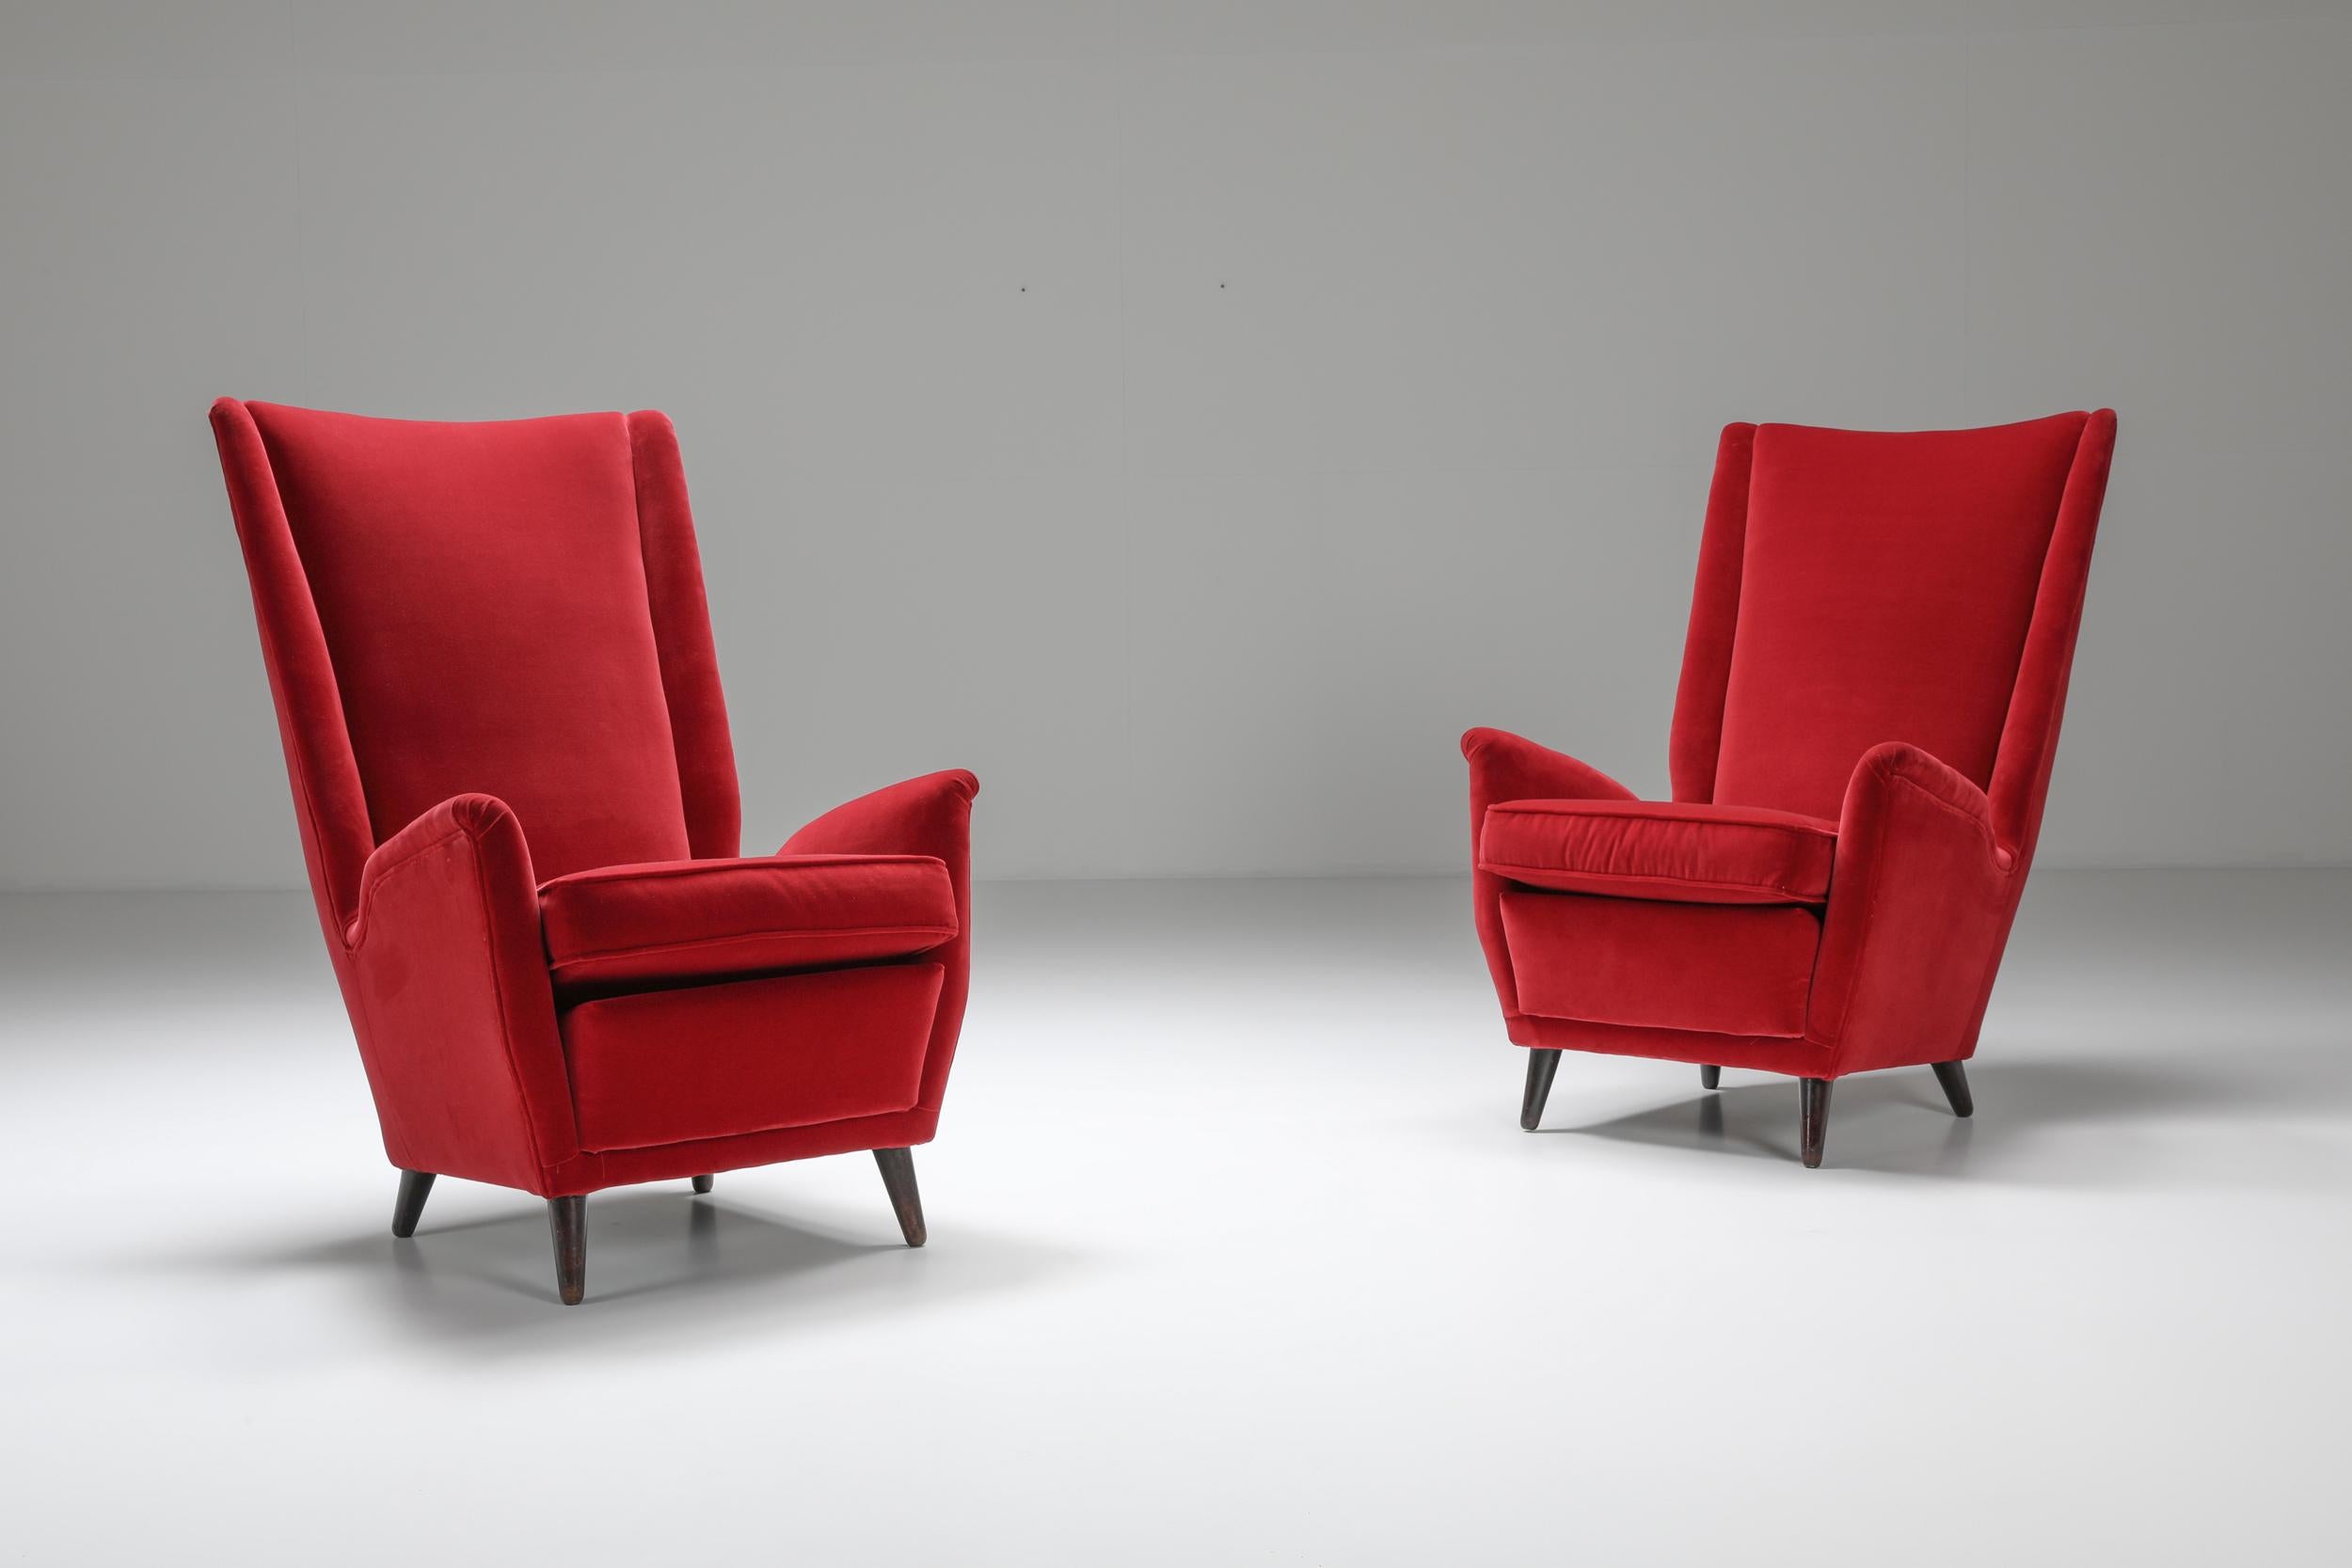 Italian wingback armchair in red upholstery by Gio Ponti. Gio Ponti high-back lounge chair with a slightly titled backrest that supports the seating posture, making them very comfortable to sit in. This elegantly shaped lounge chair of Italian